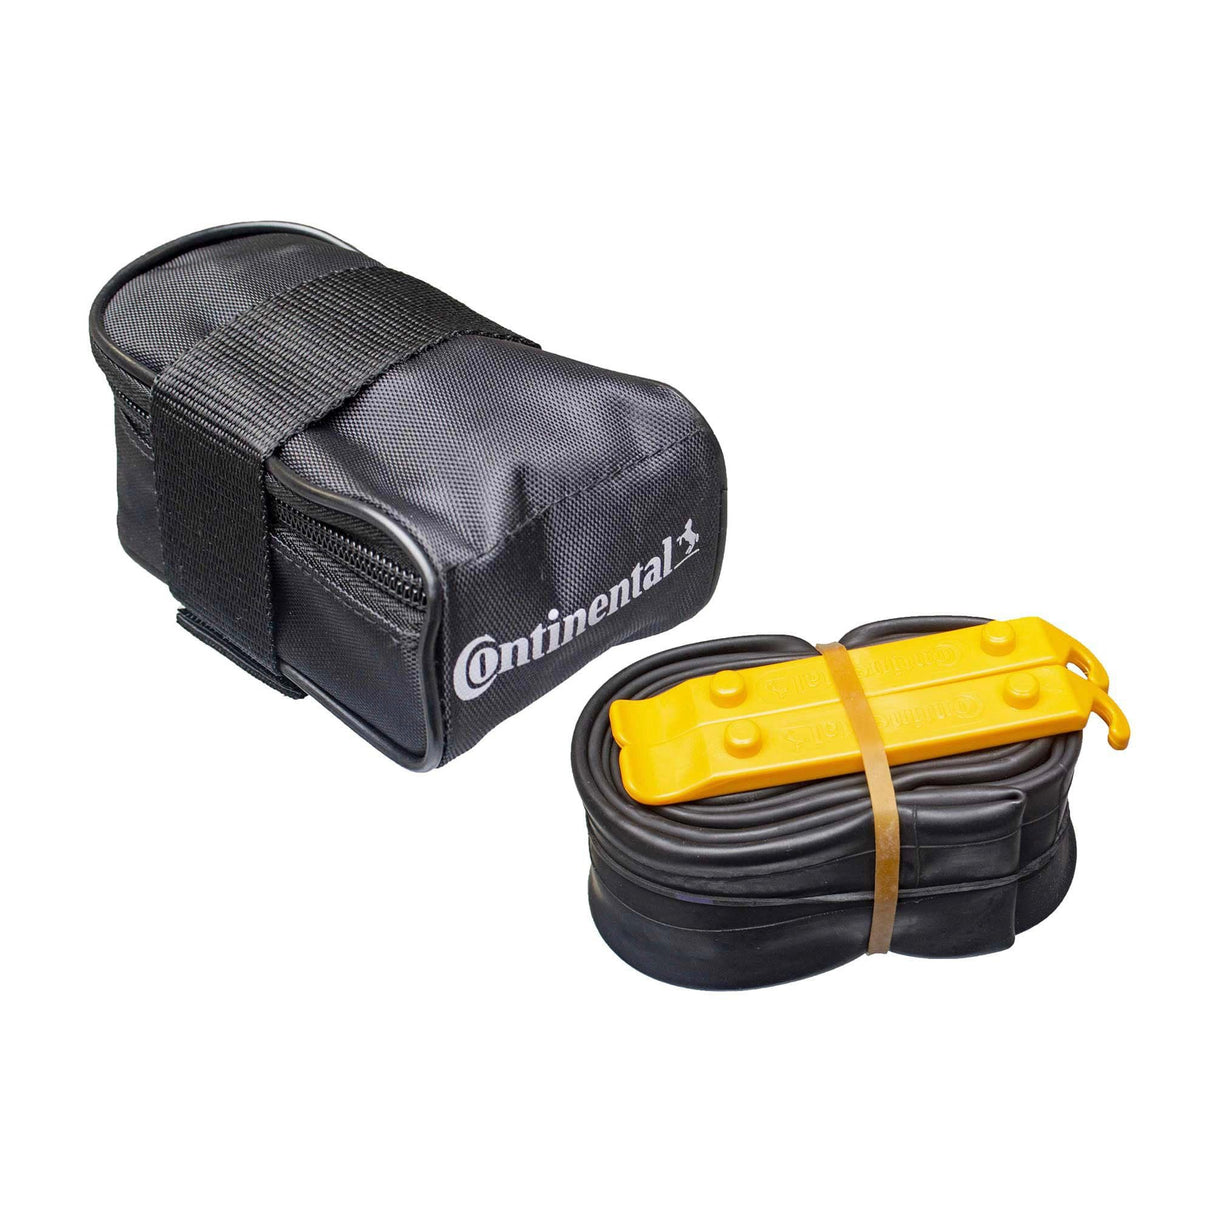 Continental Mtb Saddle Bag With Mtb 27.5 X 1.75X2.5 Presta 42Mm Valve Tube And 2 Tyre Levers: Black